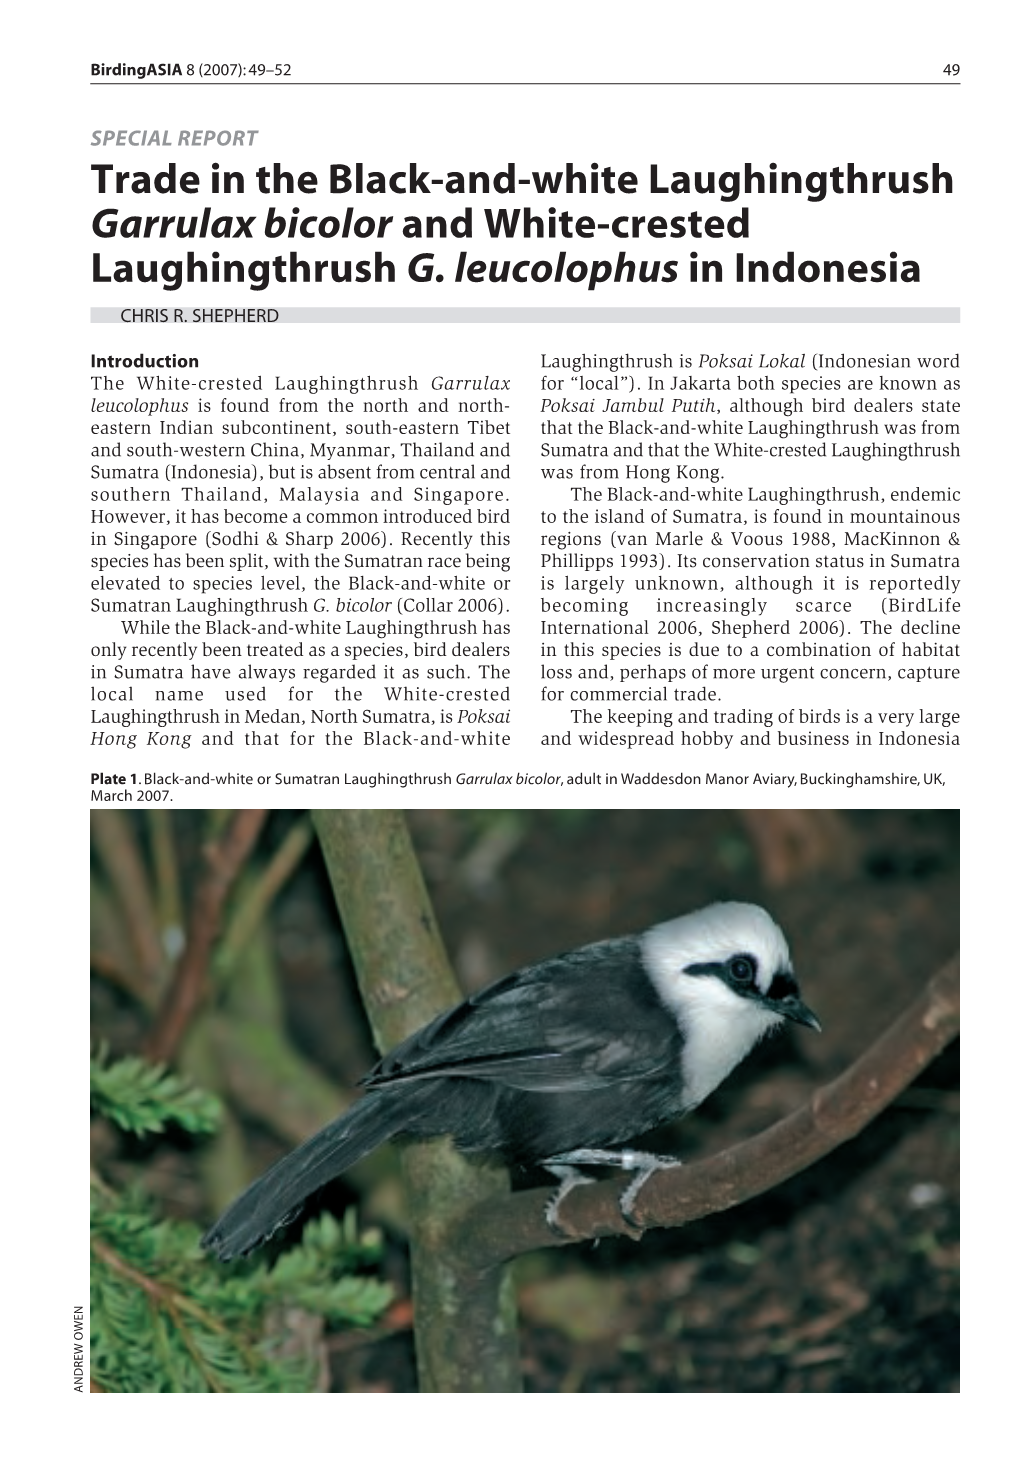 Trade in the Black-And-White Laughingthrush Garrulax Bicolor and White-Crested Laughingthrush G